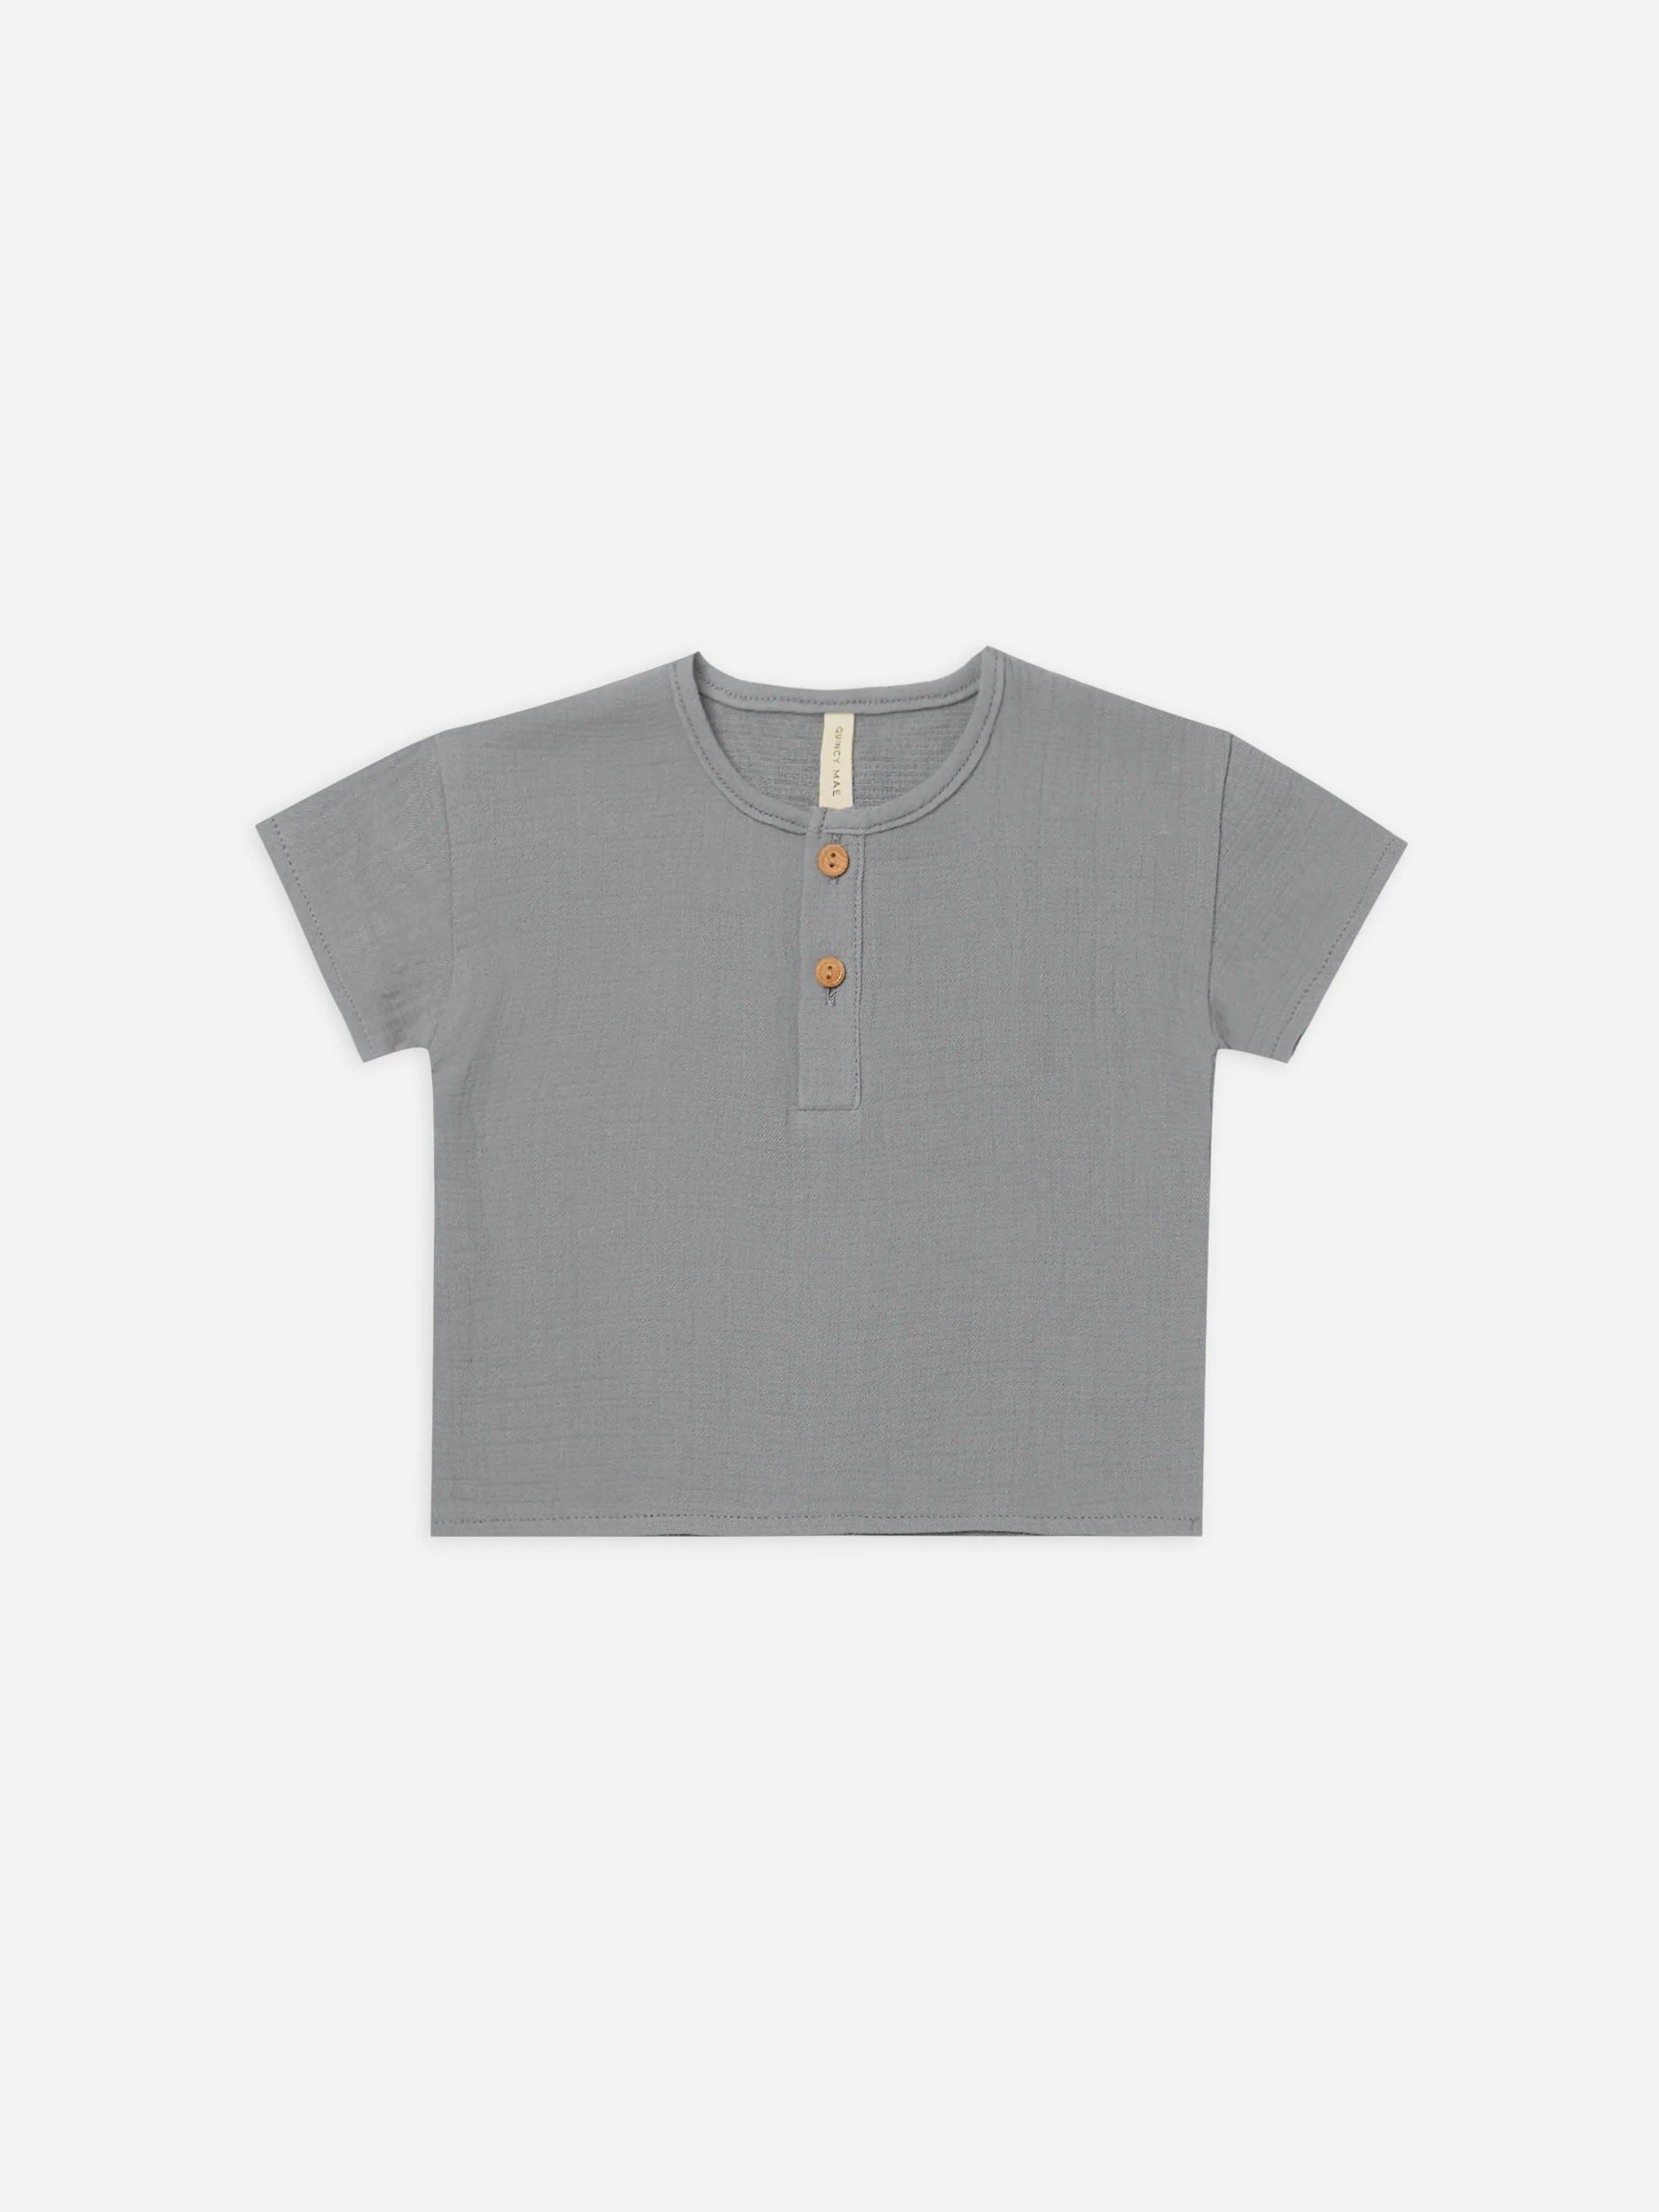 Quincy Mae Henry Top - Washed Indigo